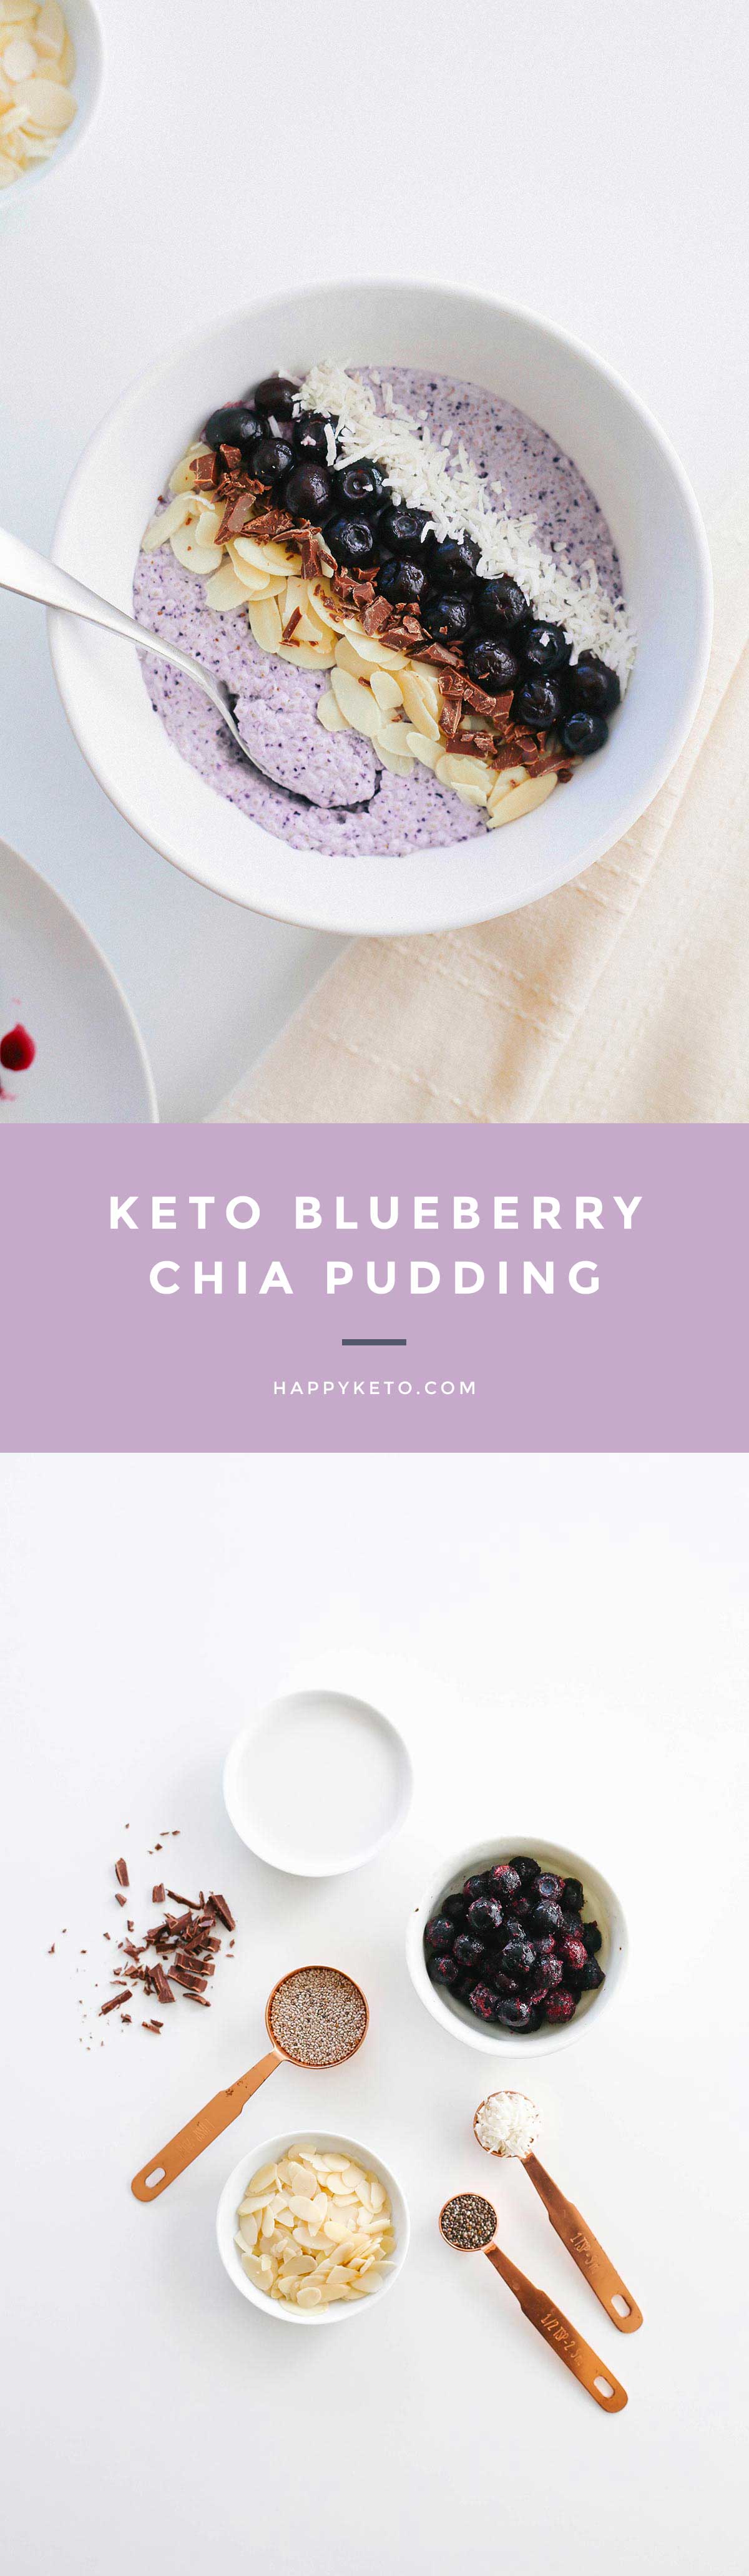 Blueberry Chia Pudding for keto and low carb. Easy recipe for breakfast.